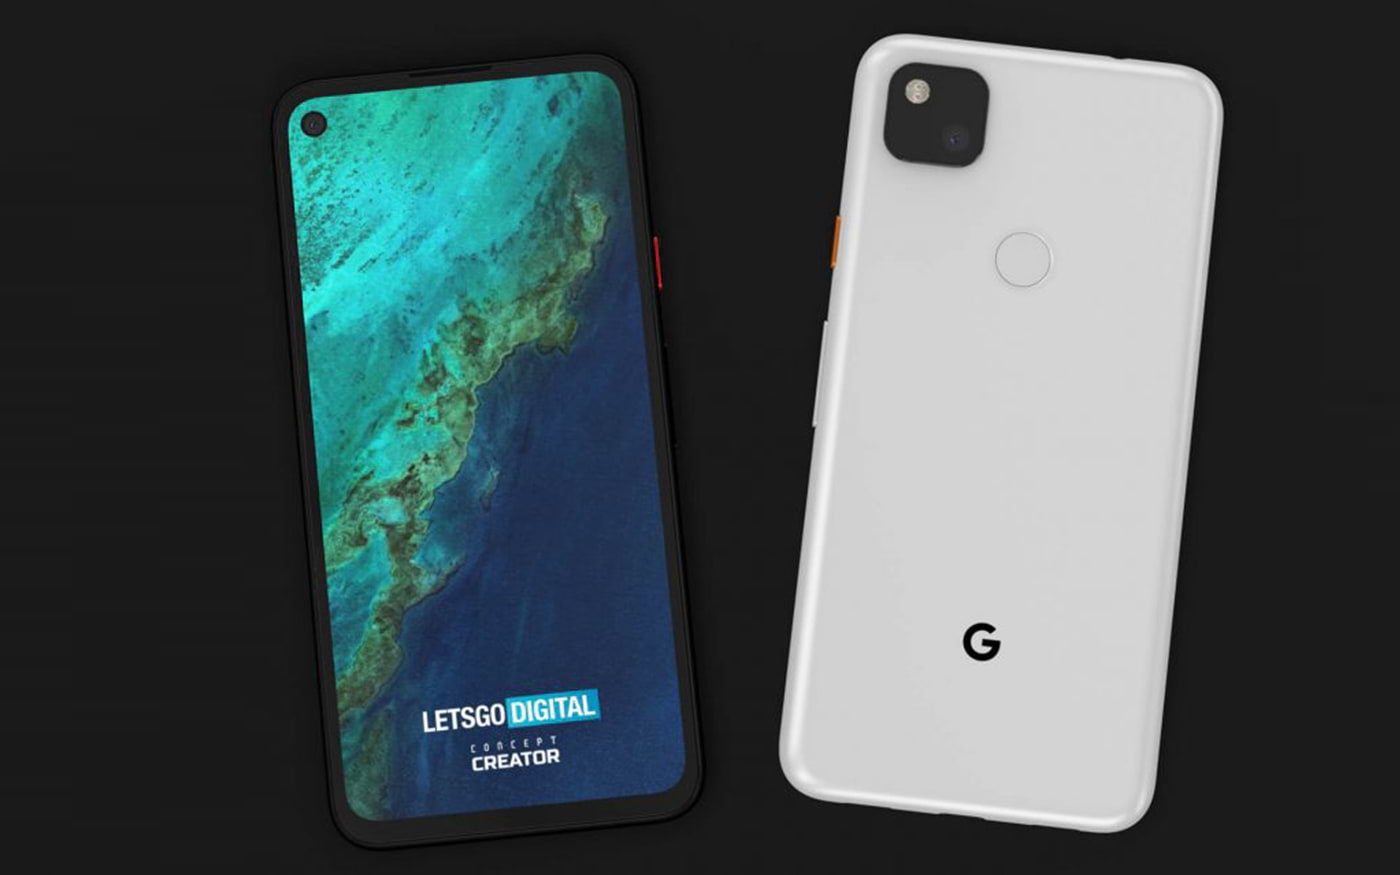 Video reveals Google Pixel 4a specifications, design and price